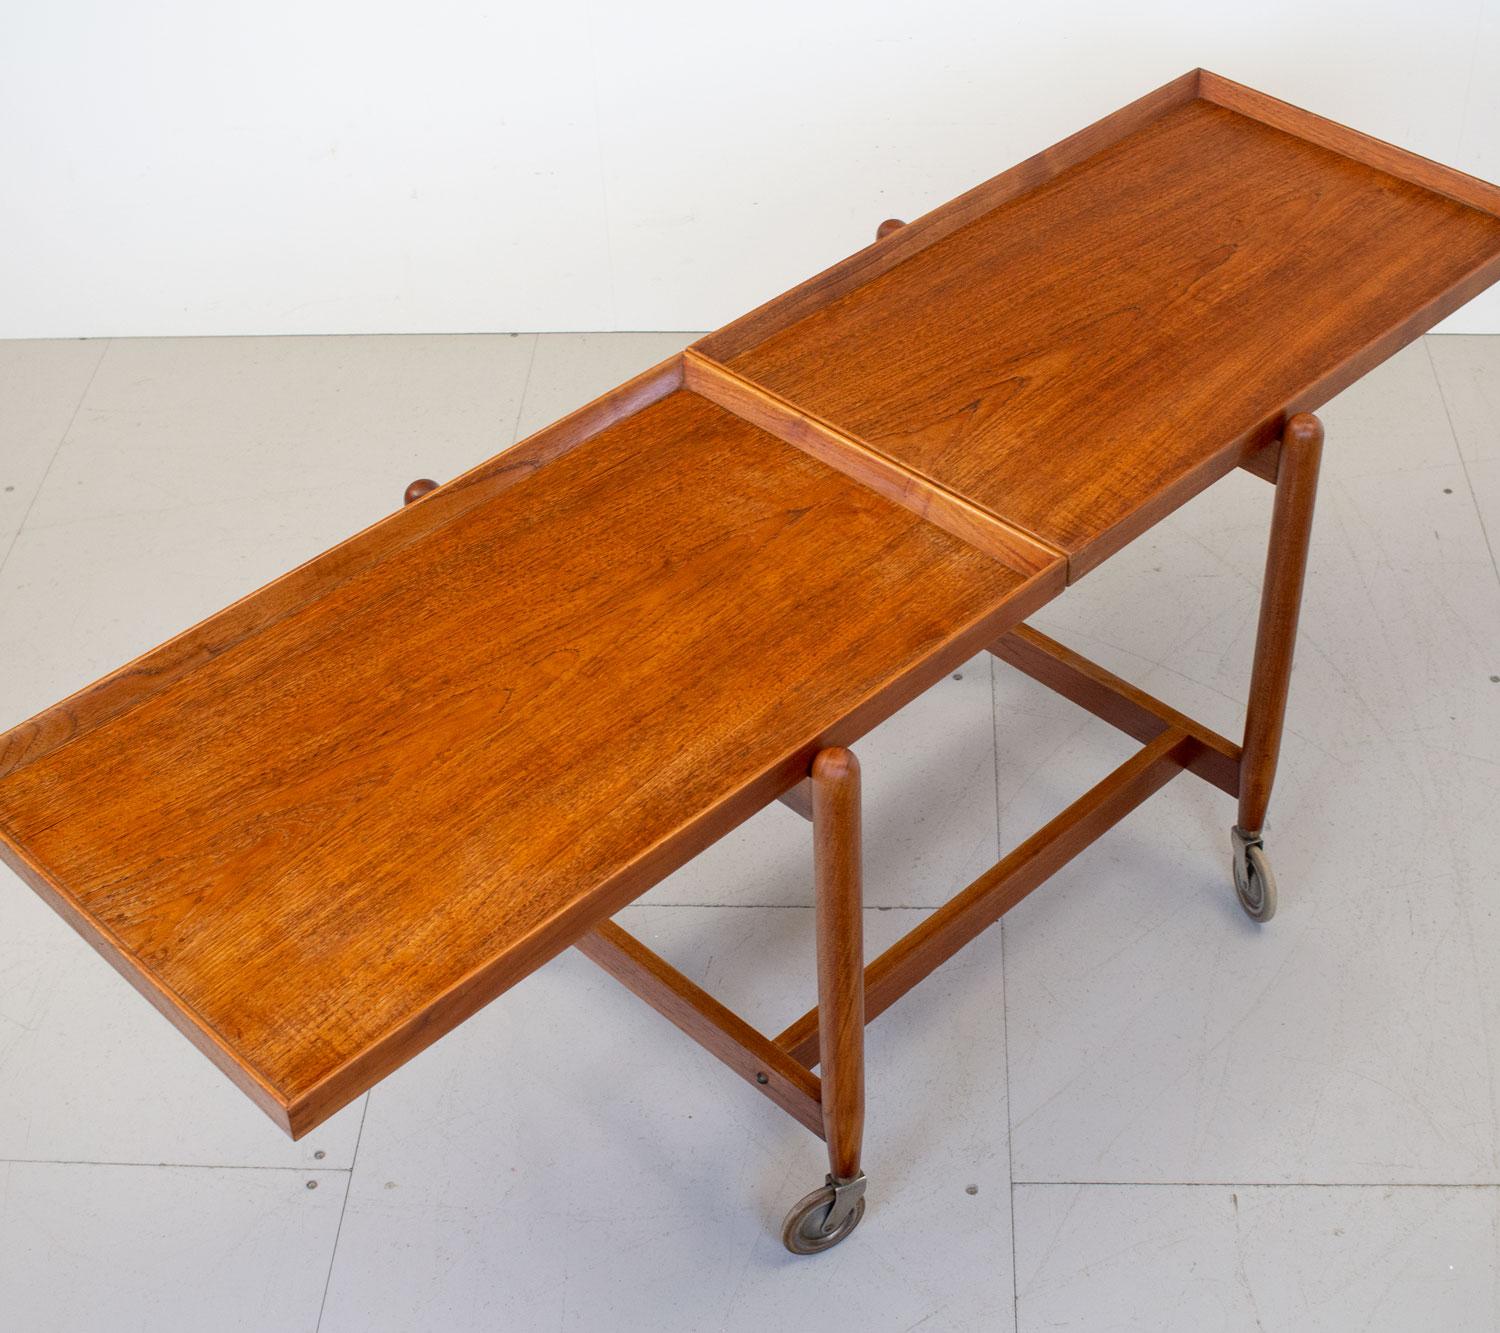 Stylish and practical 1960s Danish teak drinks trolley by Poul Hundevad for Hundevad Møbelfabrik. It doubles as a serving trolley by removing the bottom shelf and sliding it next to the top shelf. The bottom shelf can also be used as tray. This item